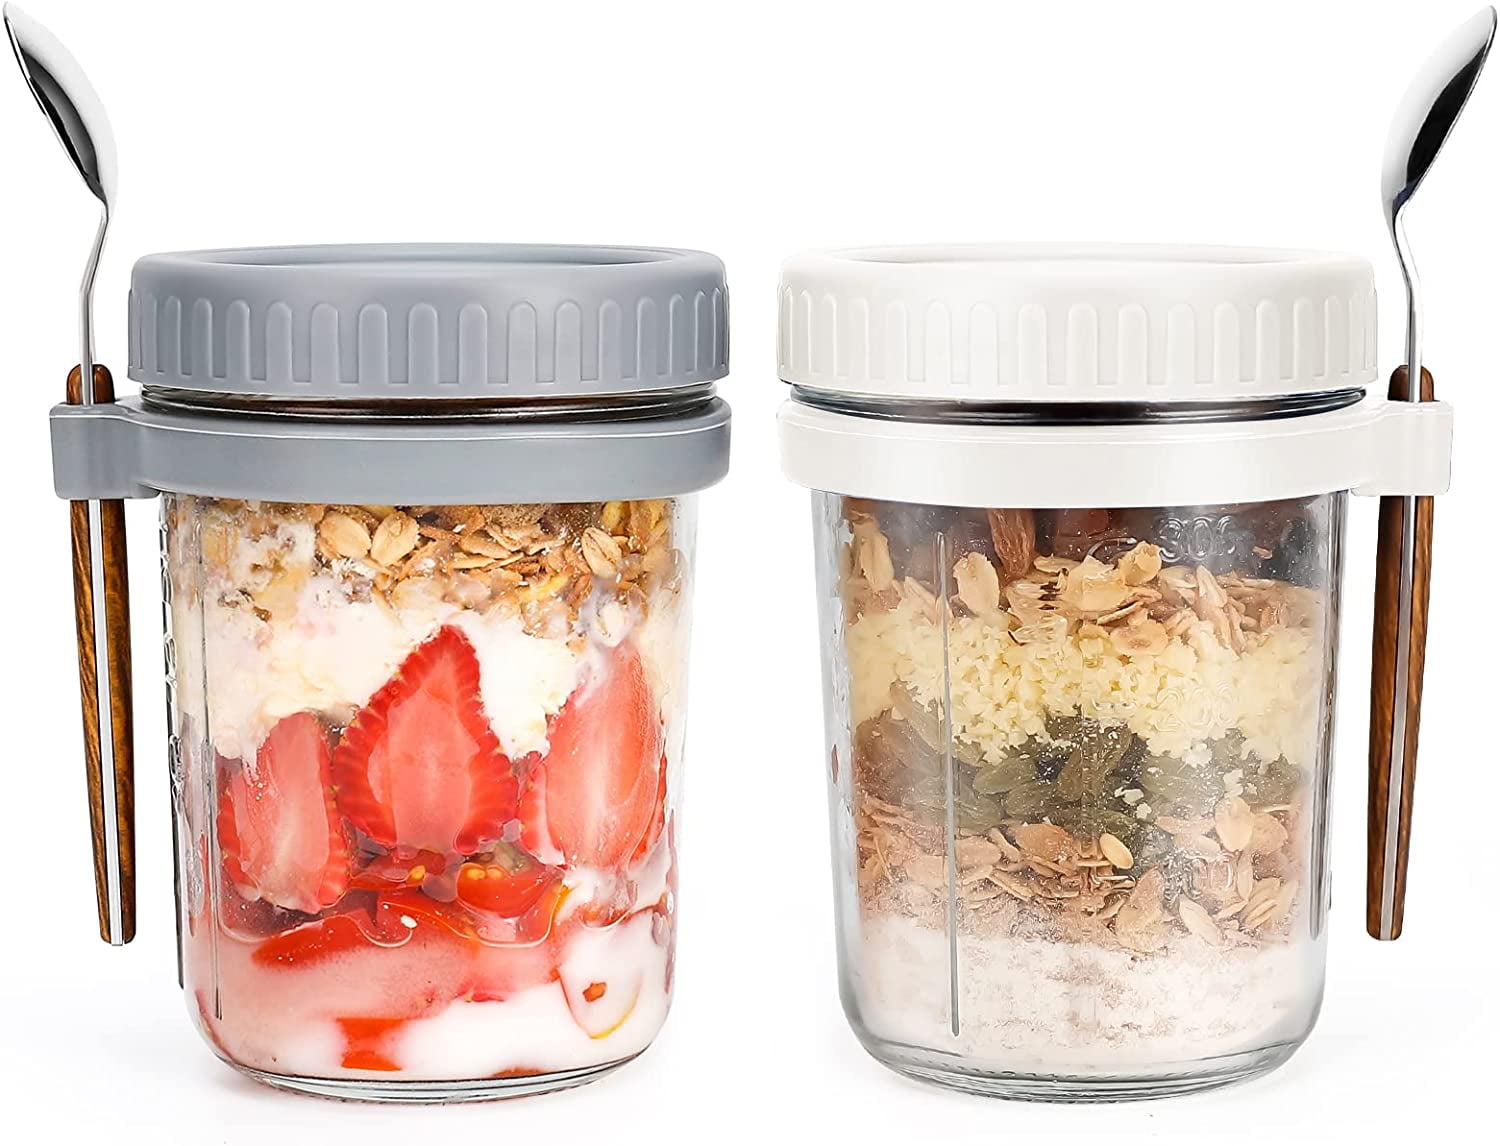 FISHOAKY 4 Pack Overnight Oats Containers with Lids and Spoons, 12